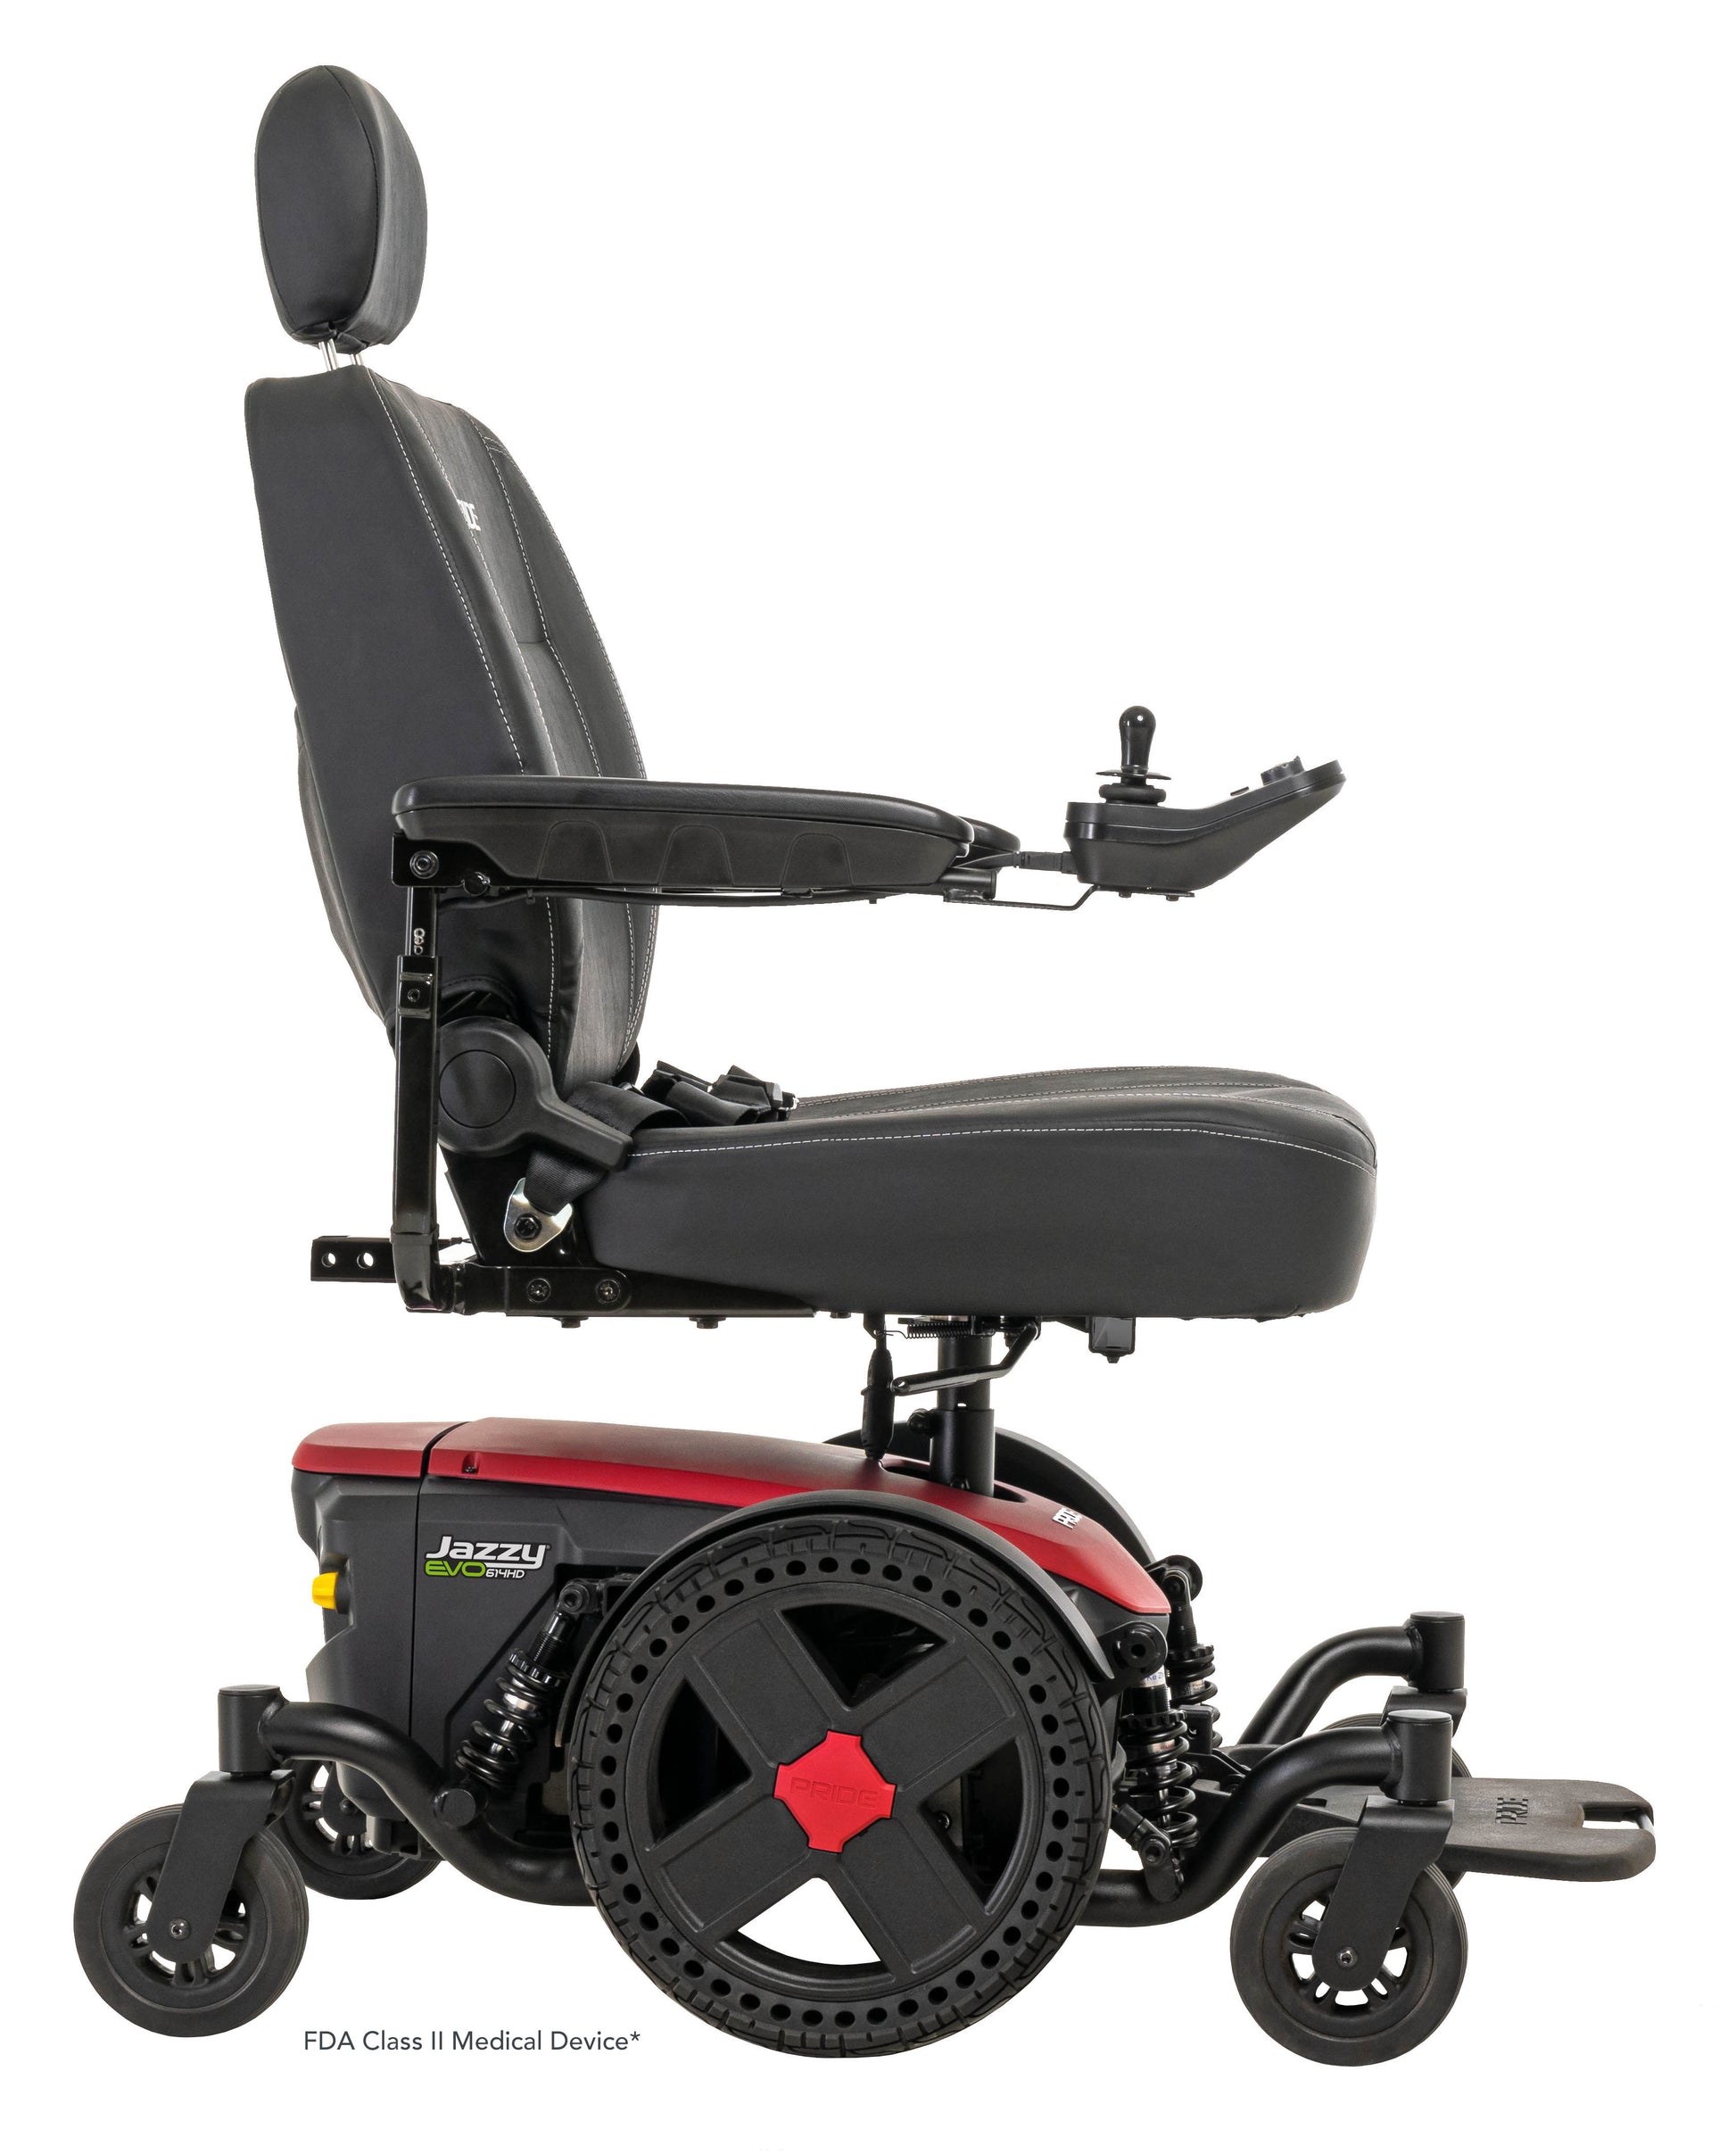 Mobility Power Chairs & Electric Wheelchairs